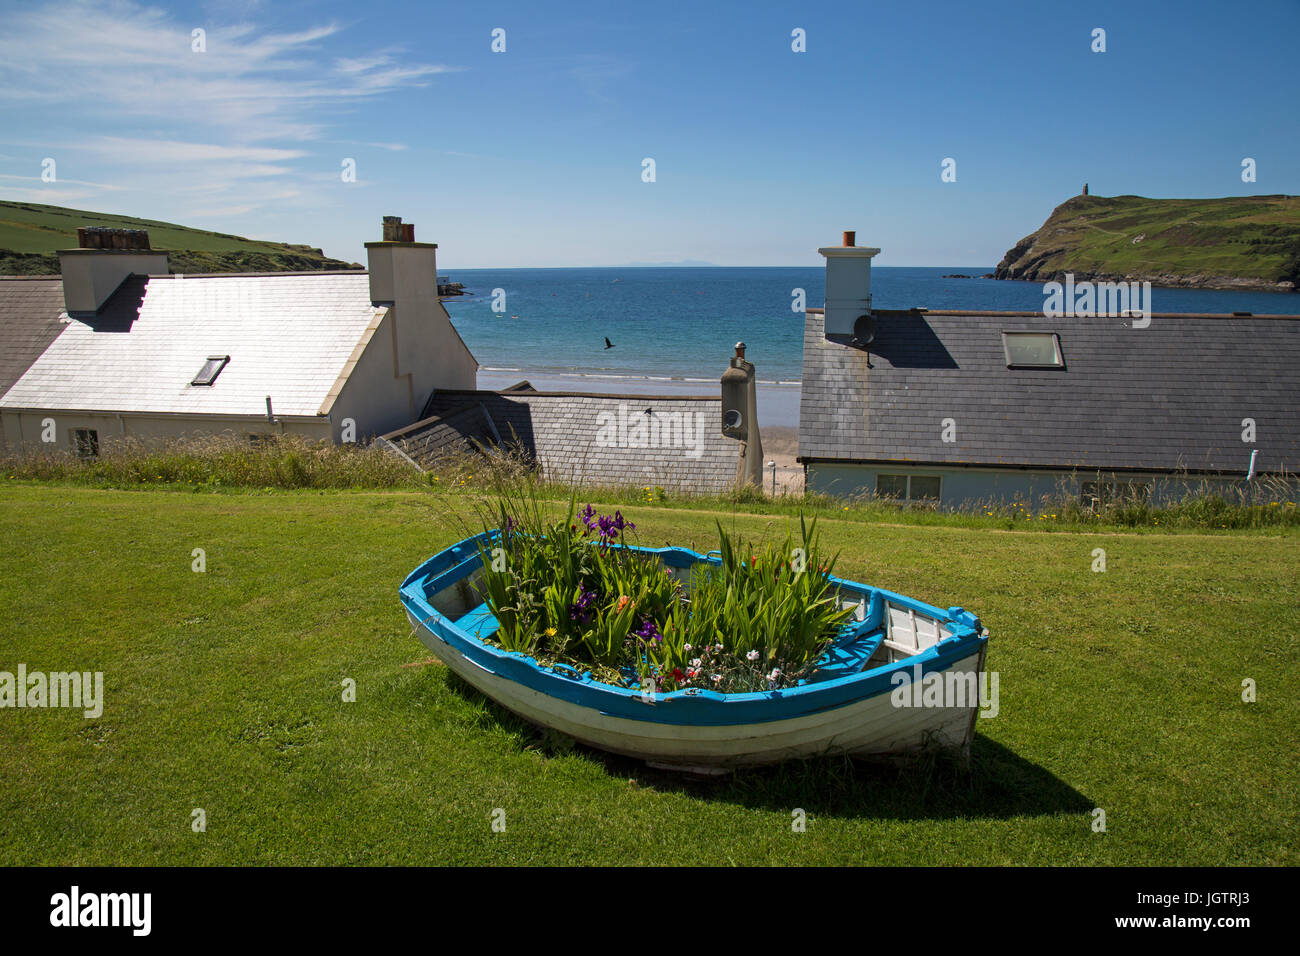 Old boats full of flowers overlooking buildings and the bay at Port Erin on The Isle of man. Stock Photo